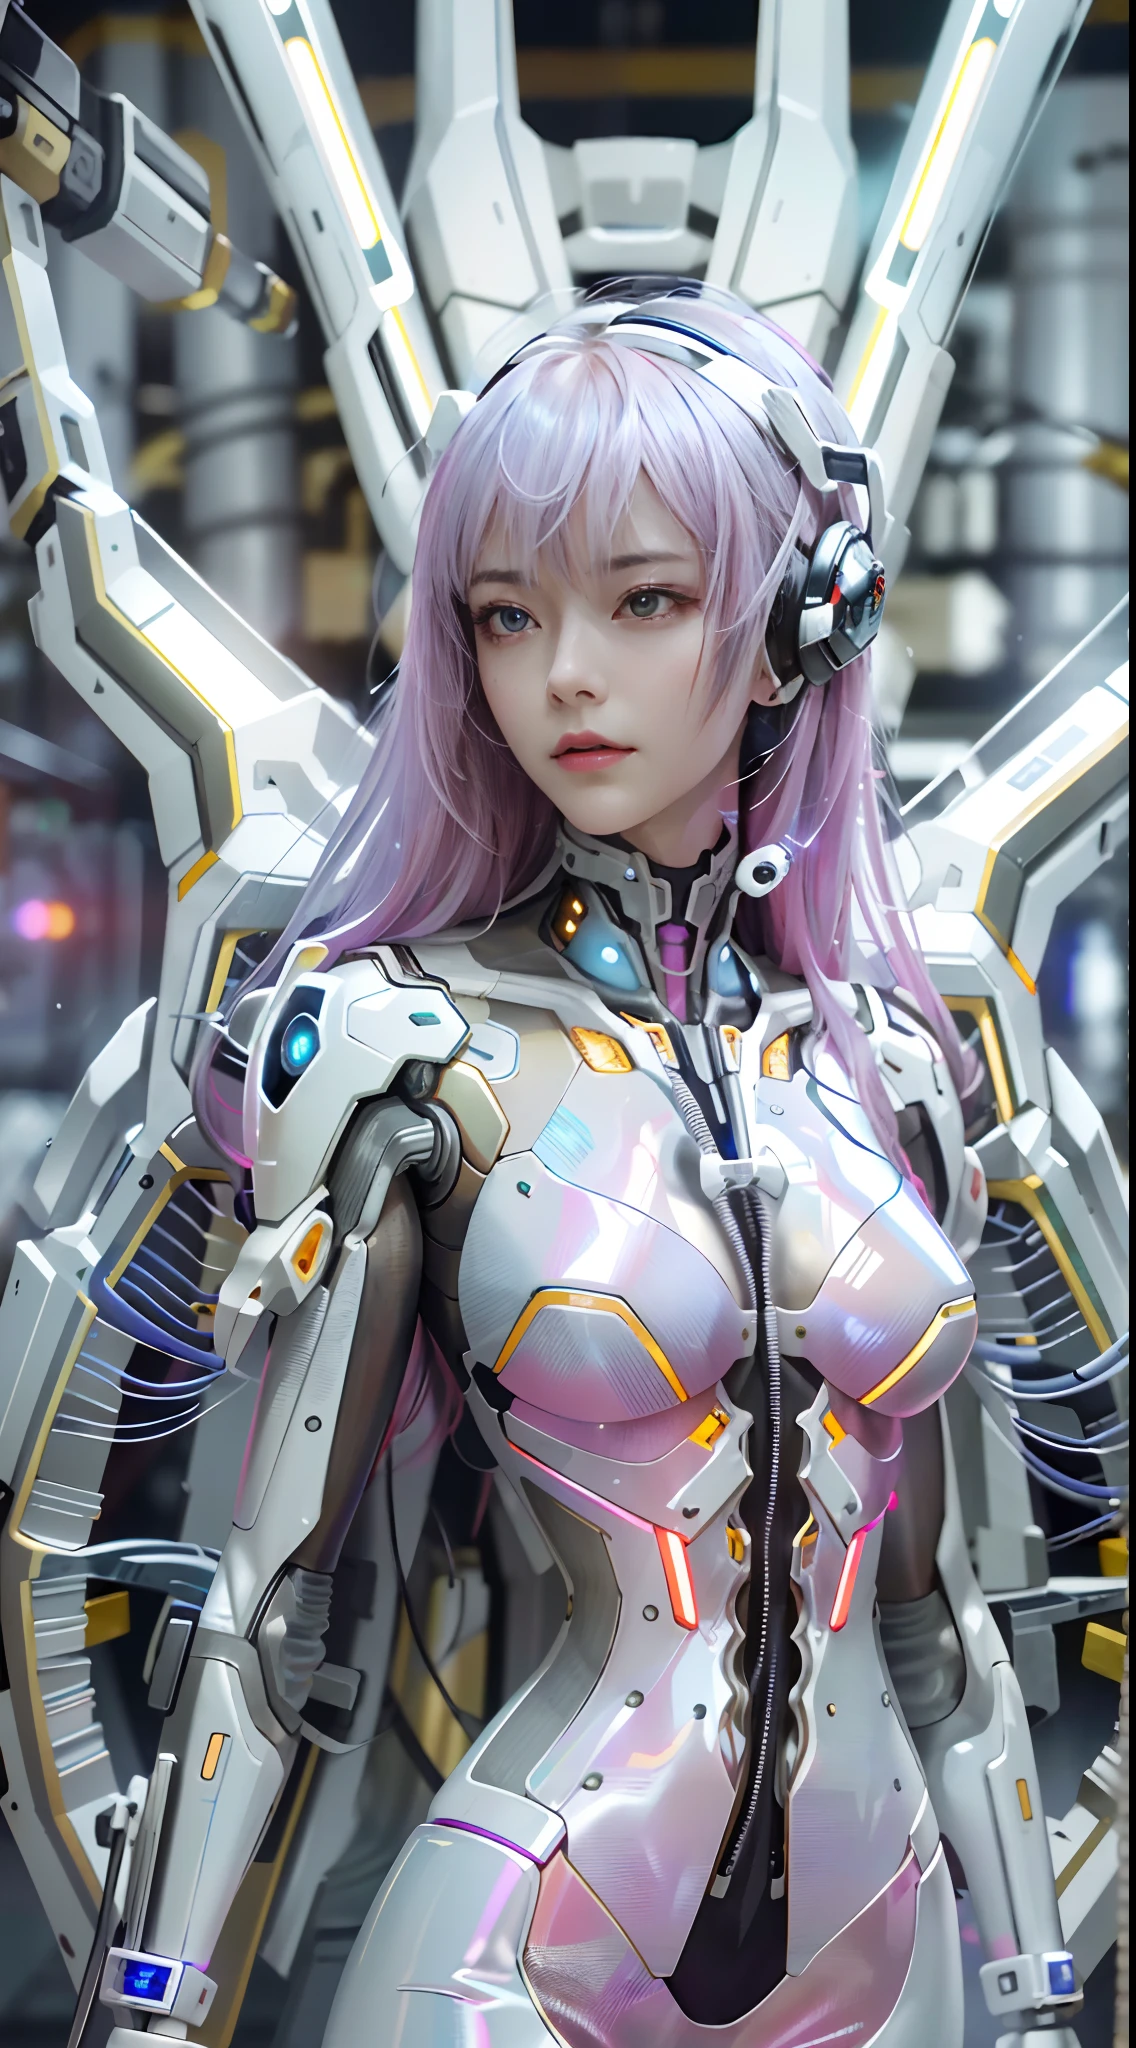 Top quality, MasteRpiece, Ultra-high resolution, ((PhotoRealistic: 1.4), RAW photo, 1 CybeRpunk andRoid giRl, ((PoRtRait)), Glossy glossy skin, (hypeR Realistic detailed)), CleaR plastic coveRs mechanical limbs, Tubes attached to mechanical paRts, Mechanical veRtebRae attached to the spine, mechanical ceRvical attachment to the neck, wiRes and cables connecting to head, evangelion, ((Ghost in the Shell)), Luminous small light, globalillumination, Deep shadows, Octane RendeRing, 8K, ultRashaRp, metals, IntRicate ORnament Details, baRoque detailed, veRy complex details, Realistic light, CGSoation tRend, Facing the cameRa, neon light detail, (AndRoid manufactuRing plant in the backgRound), aRt by H.R. GigeR and Alphonse Mucha.(RAW photo:1.2)，camel-toe，Hollow-out on，sweat leggs，， Smooth pink skin, shiny metalslic glossy skin, Shiny，spRead theiR leg-shaped legs，IRRitated， all oveR body，Full body like